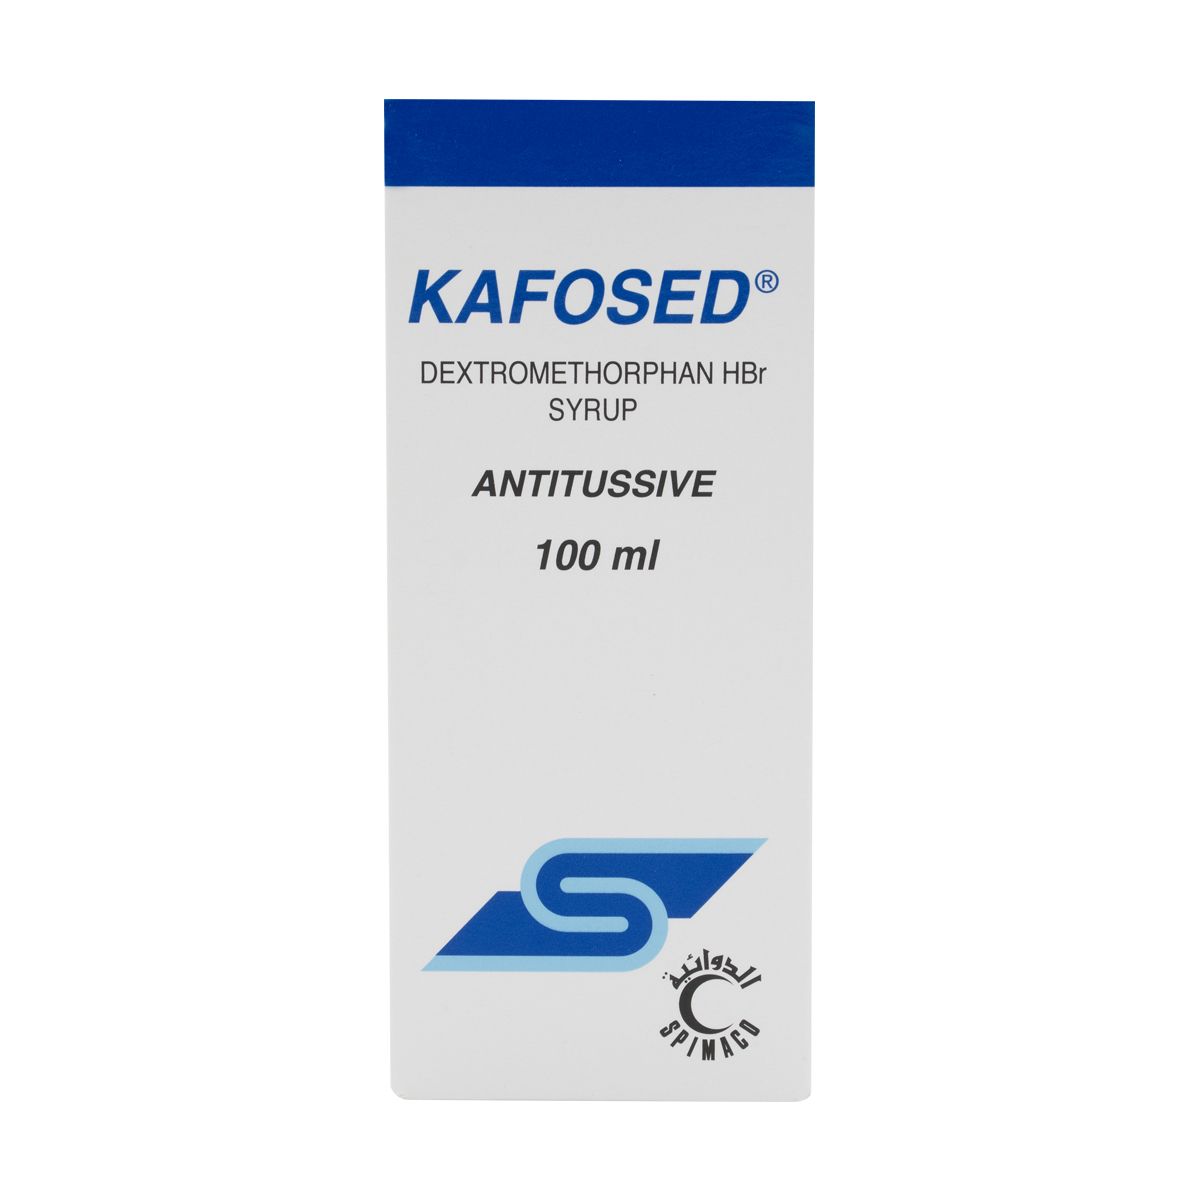 KAFOSED 15 Syrup 100Ml